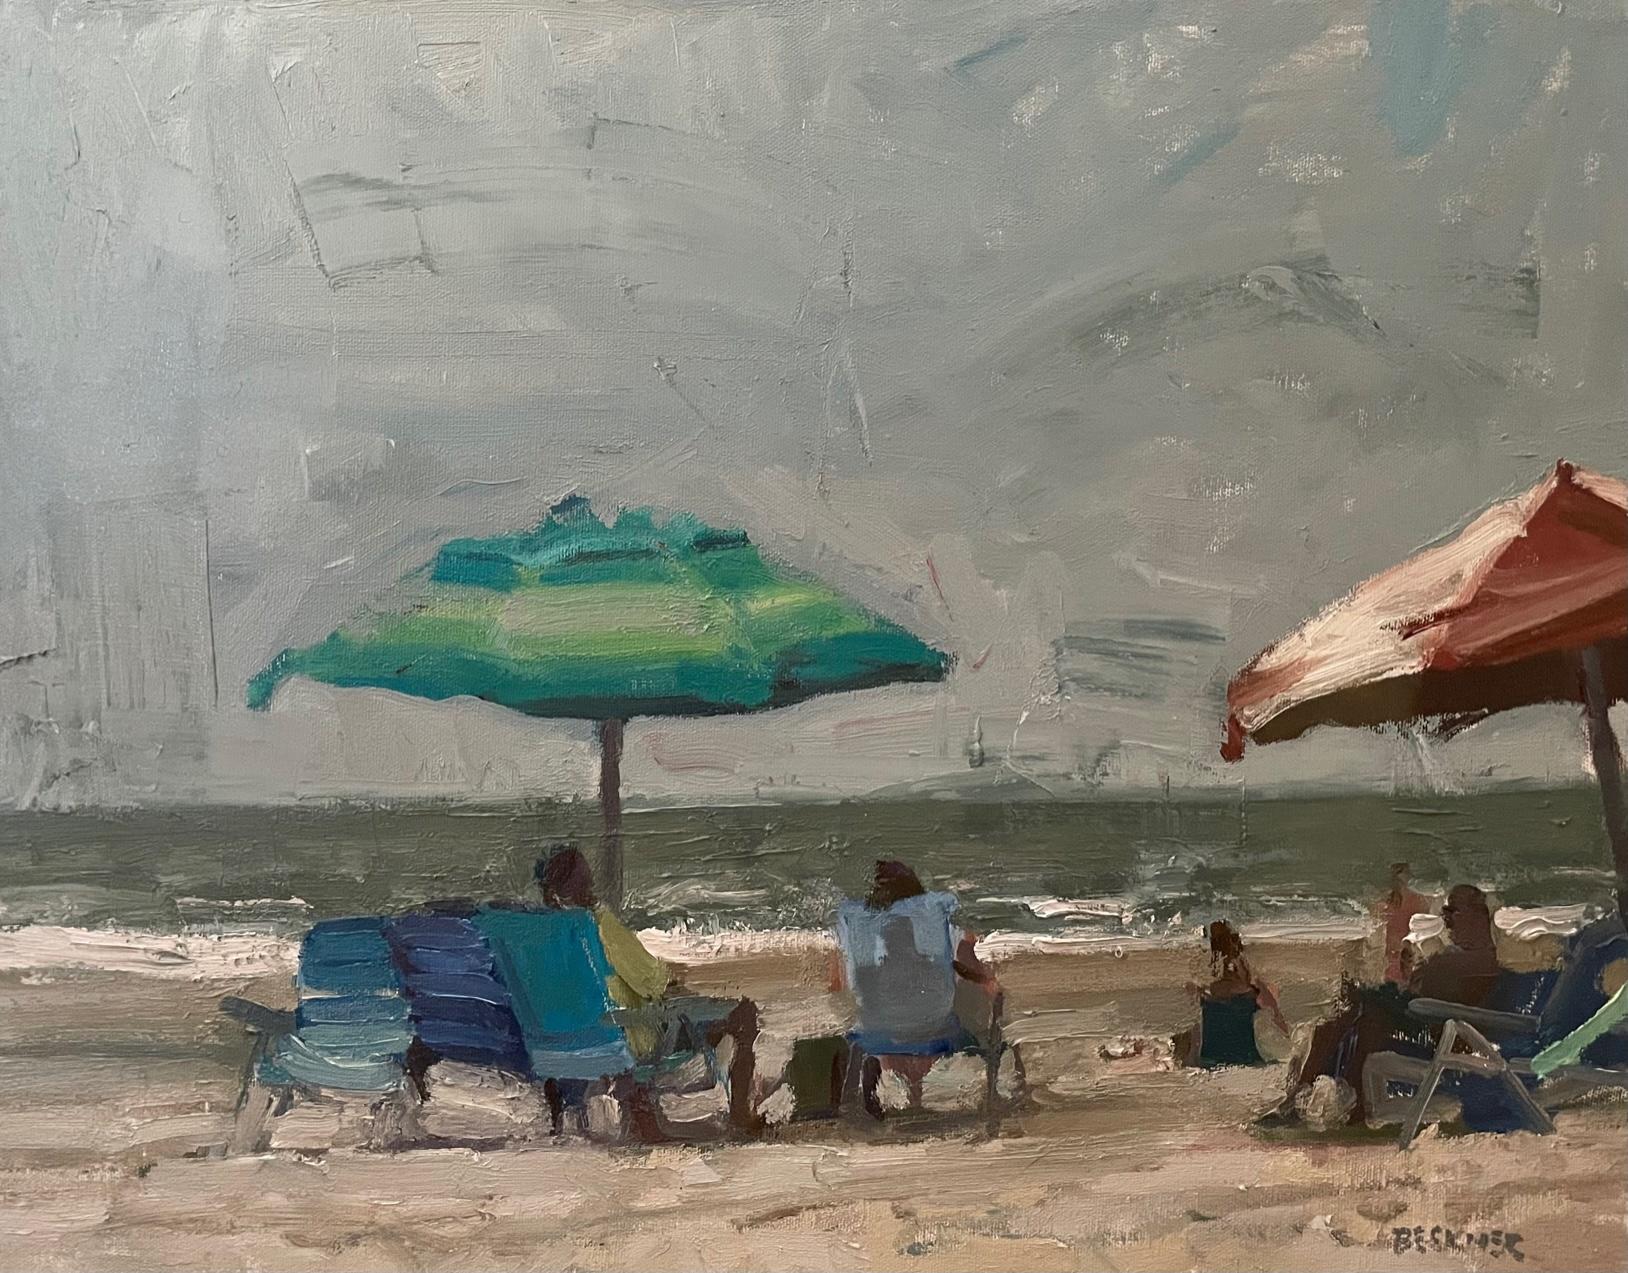 Beach Umbrellas is an example of the bright colors that Beckner uses in his paintings. Jim Beckner just finished a series of impressionist  beach paintings. All paintings are in the gallery in Houston. 

Denver-based artist Jim Beckner paints like a